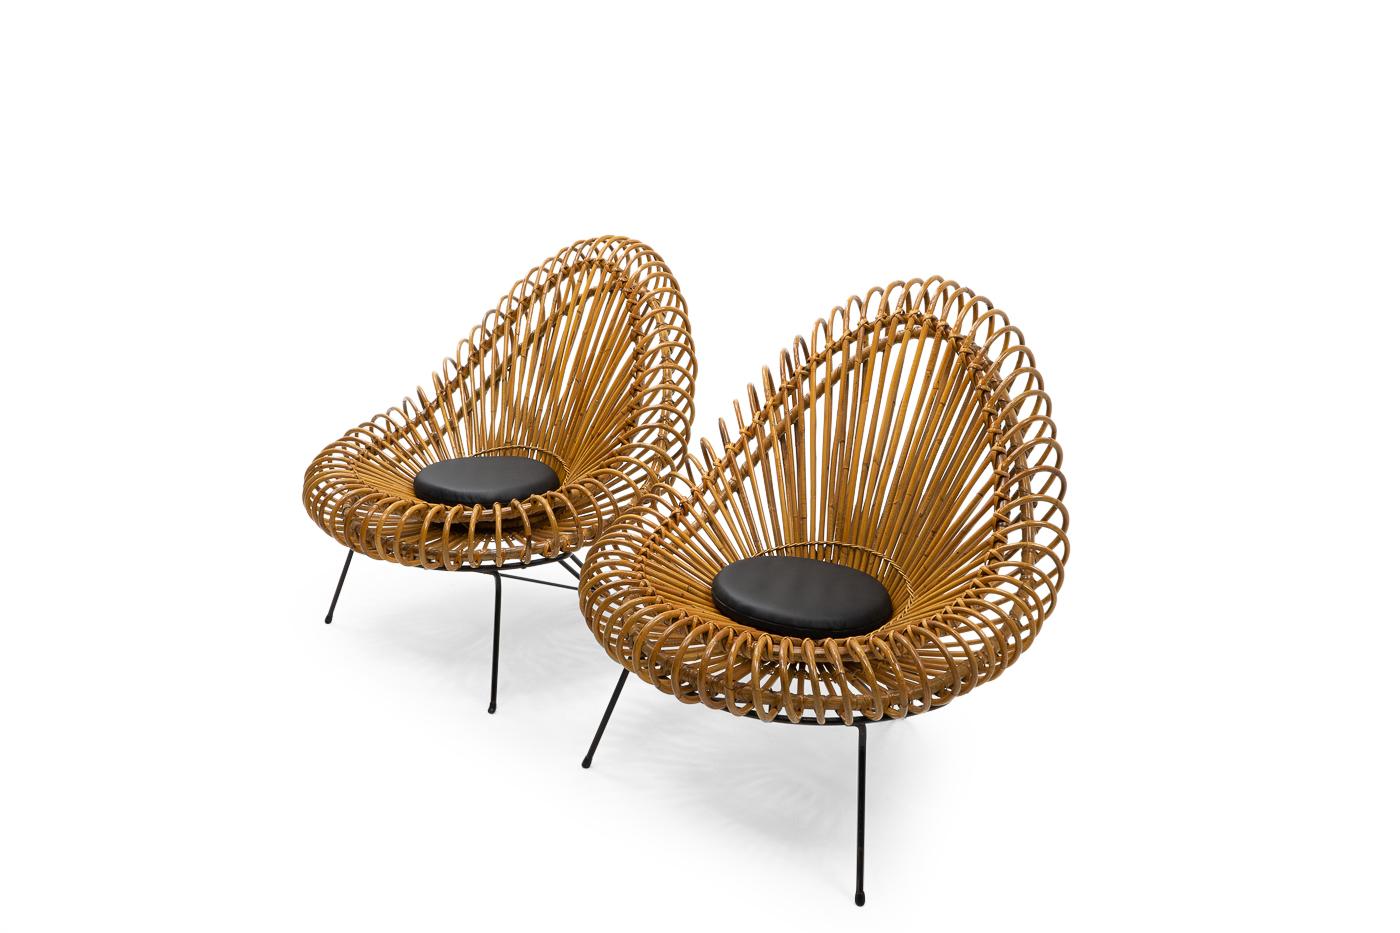 A beautiful pair of sculptural rattan lounge chairs attributed to Janine Abraham and Dirk Jan Rol. 

The chairs have a bent rattan structure, supported by an iron frame, and are typical of the style of the aforementioned design couple. 

Both